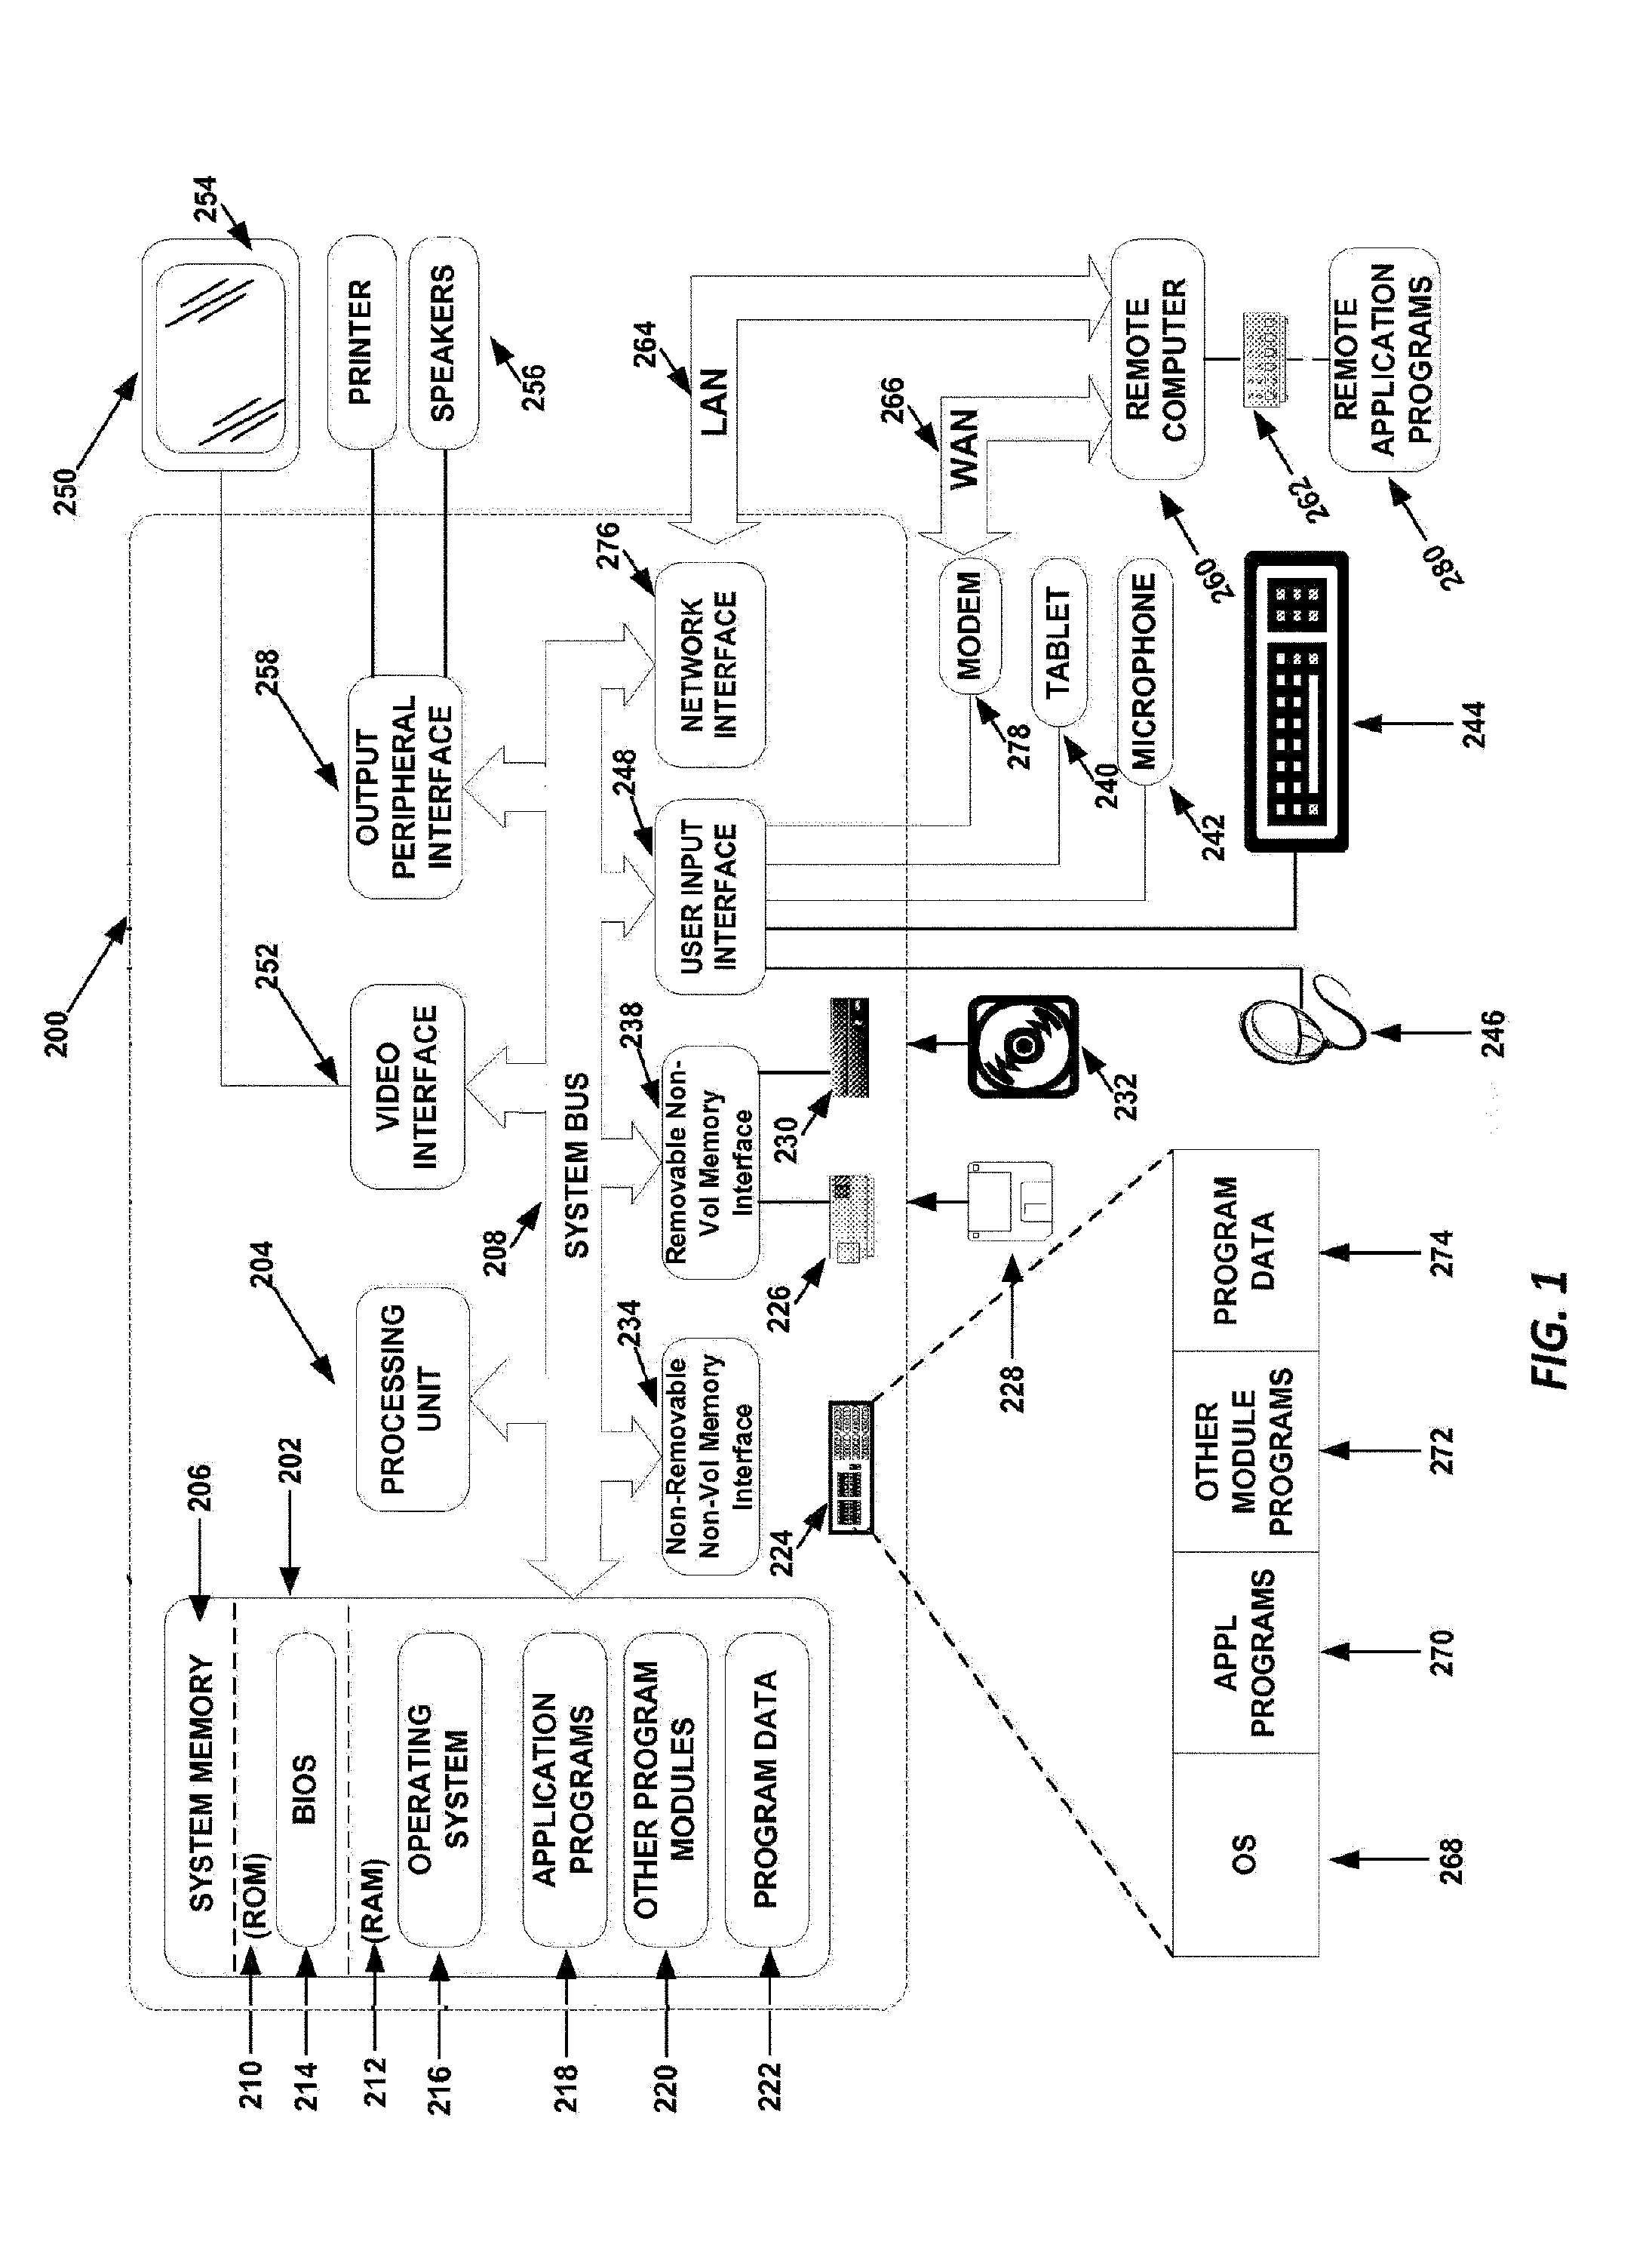 Method, system and storage device for creating, manipulating and transforming animation